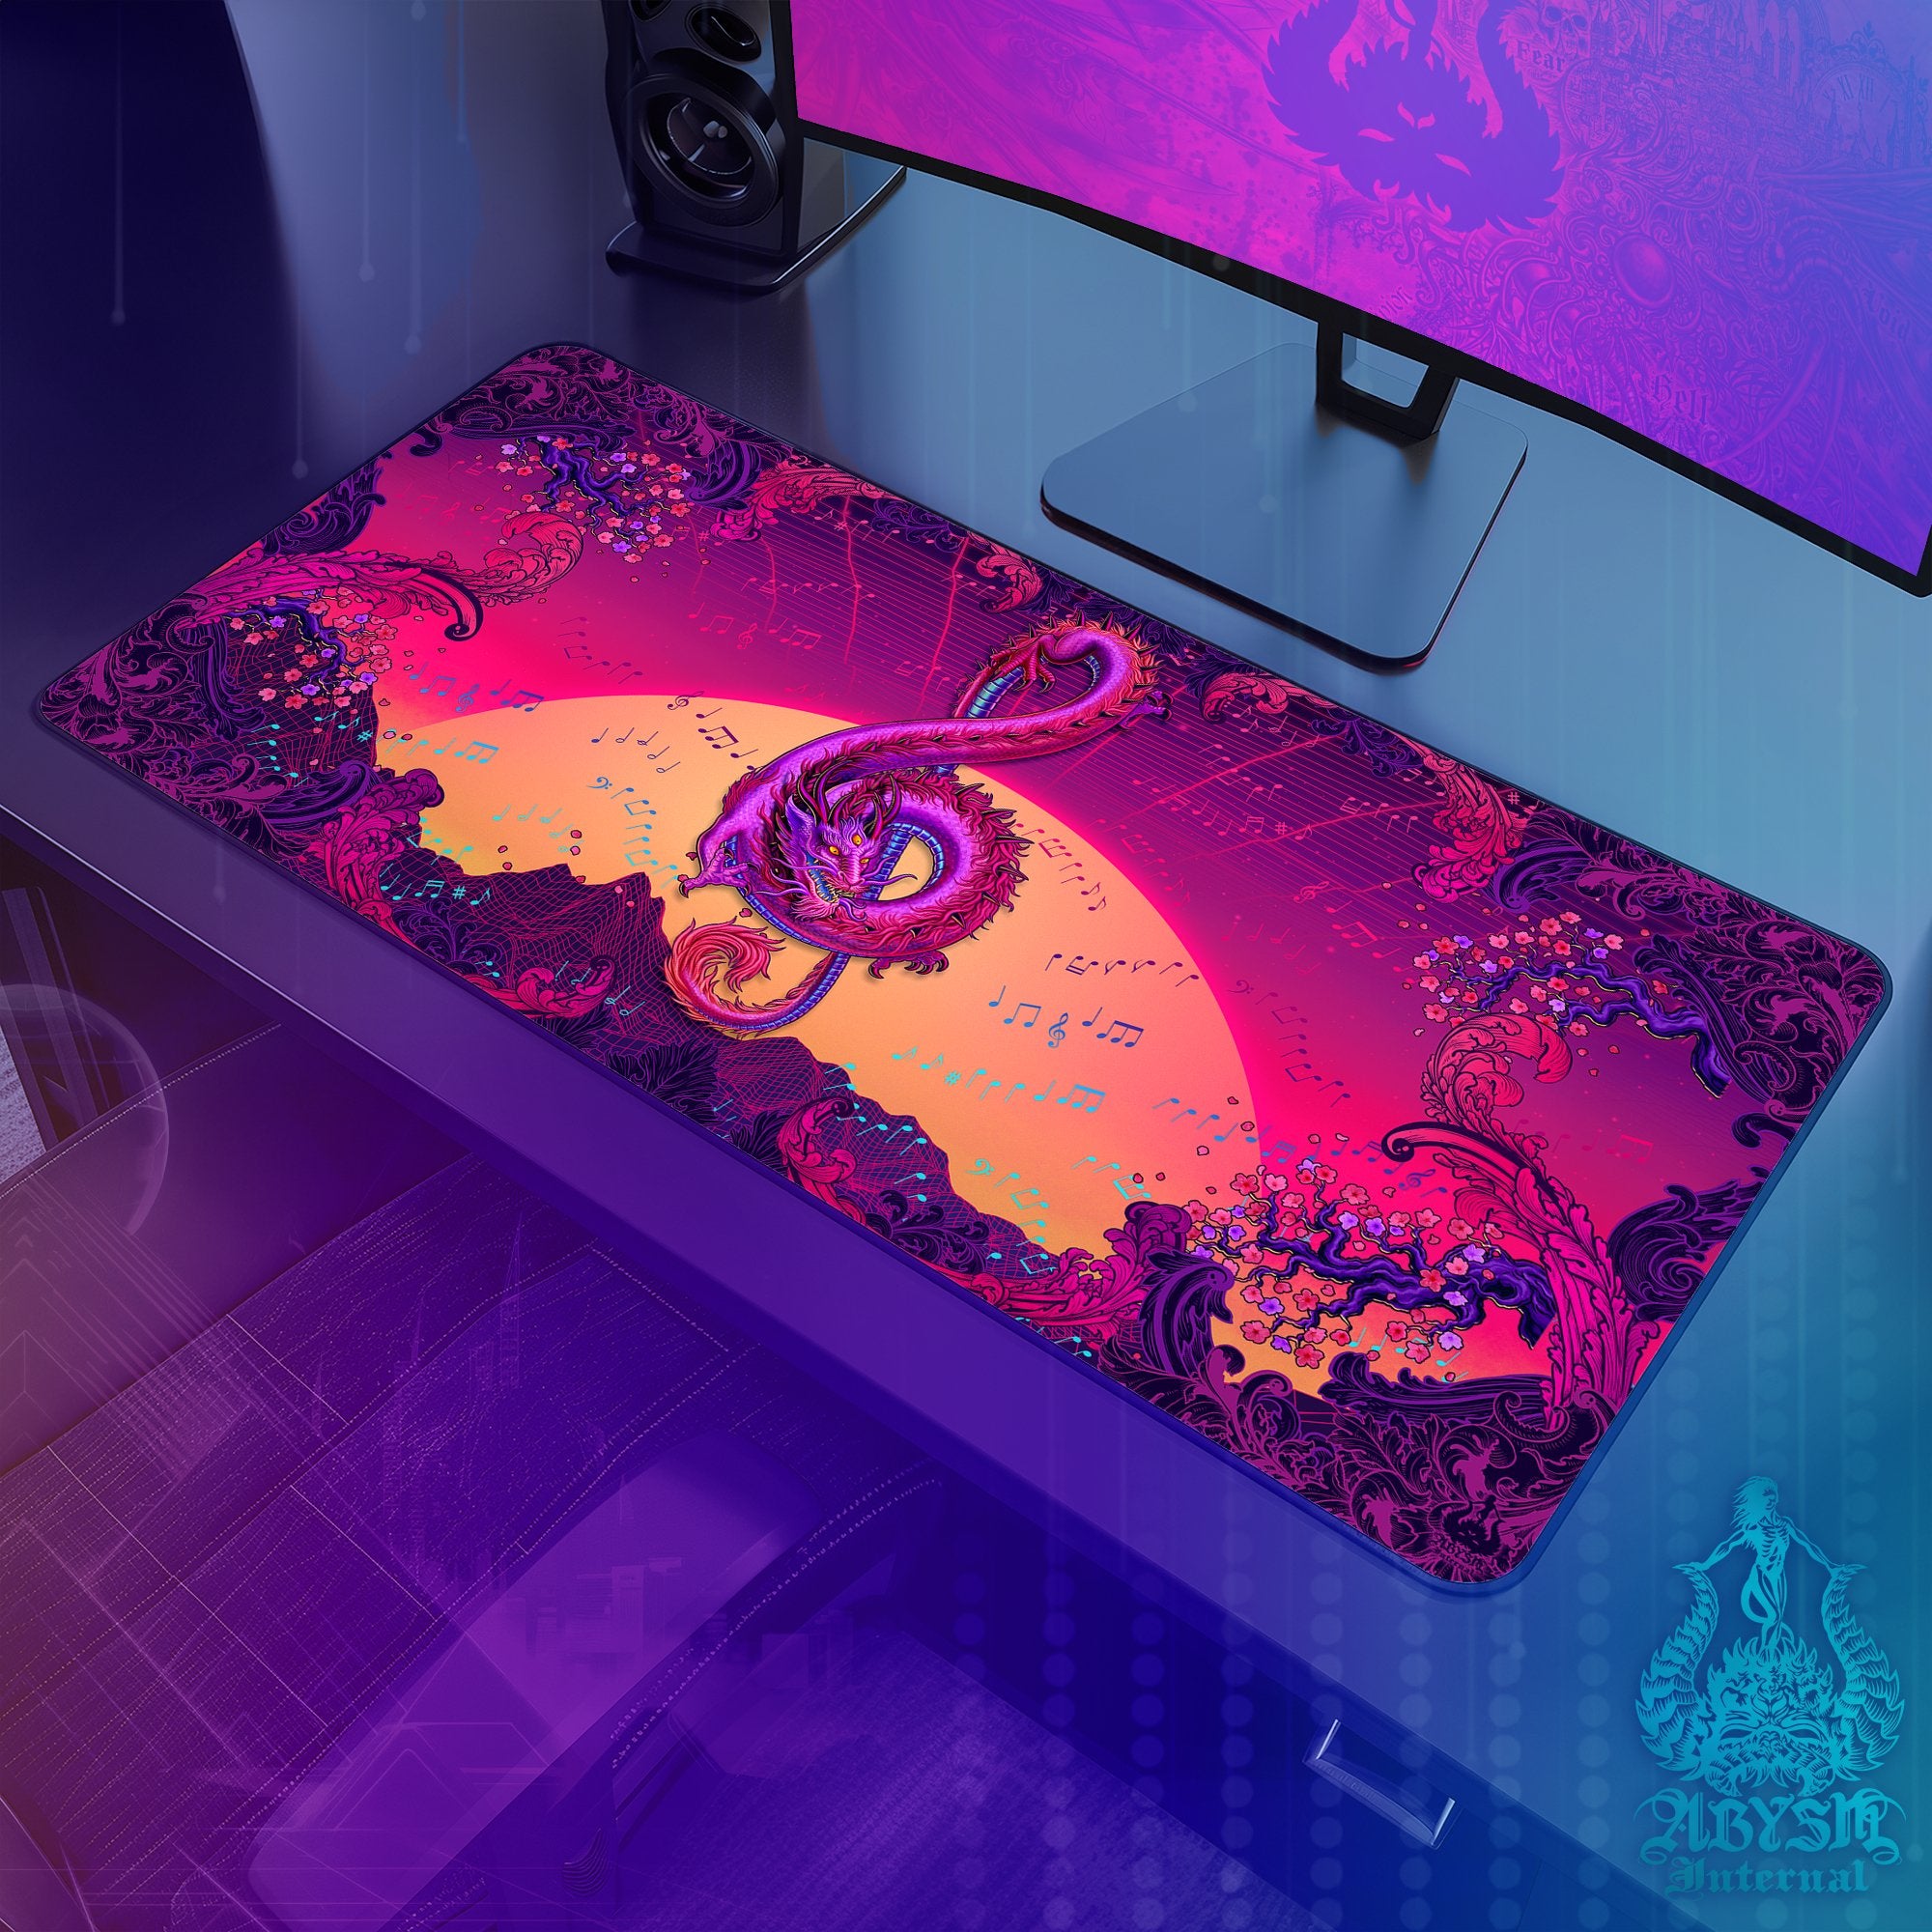 Music Gaming Desk Mat, Psychedelic Dragon Mouse Pad, Trippy Asian Table Protector Cover, Vaporwave Workpad, Treble Clef Art Print - Abysm Internal